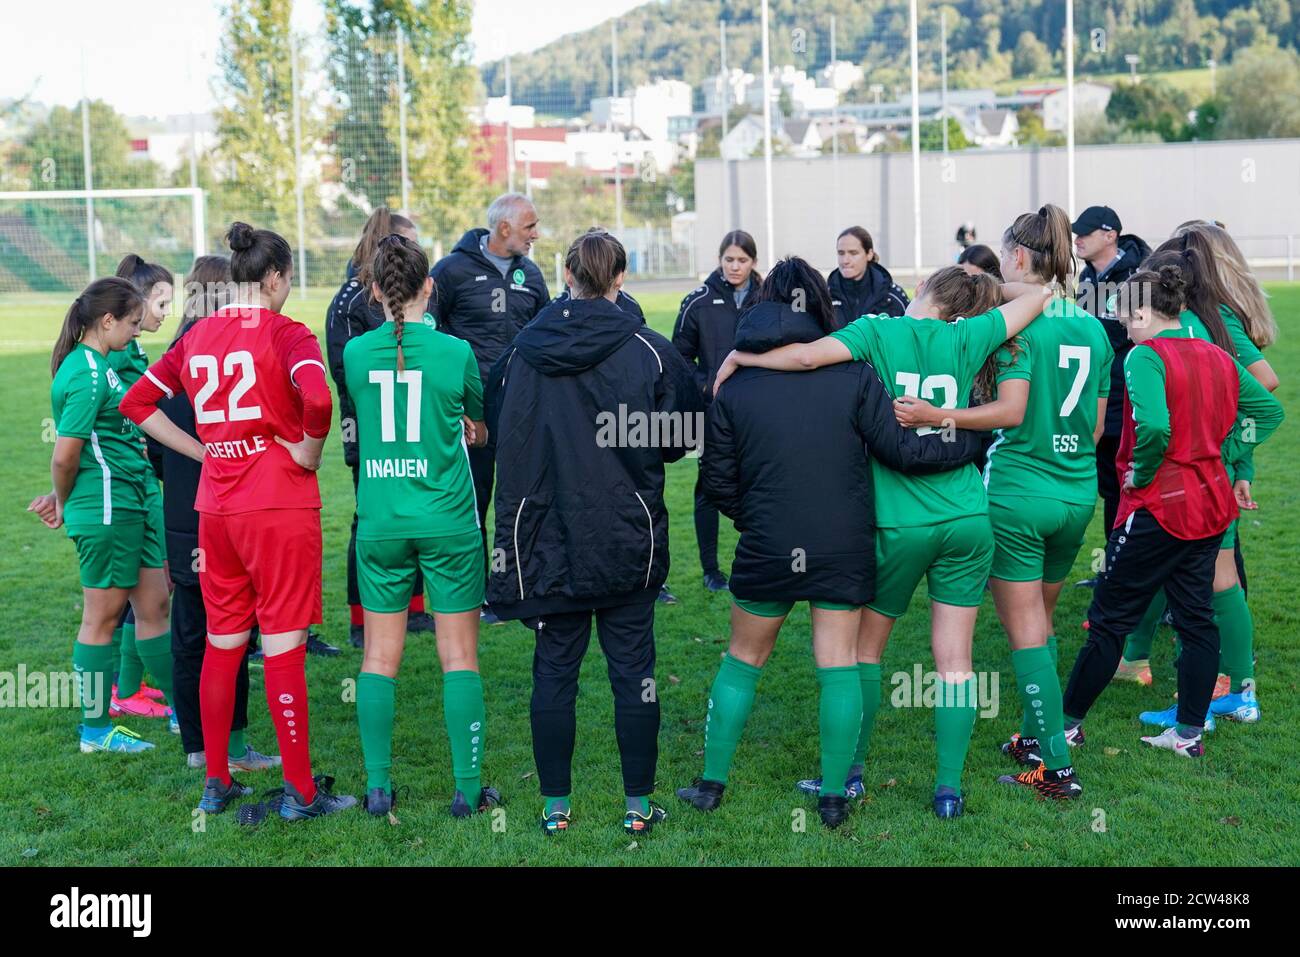 27.09.2020, St. Gallen, Espenmoos Stadium, AXA Women's Super League: FC St. Gallen-Staad - BSC YB-Women, Team St. Gallen-Staad after the late equalization in the team circle Stock Photo